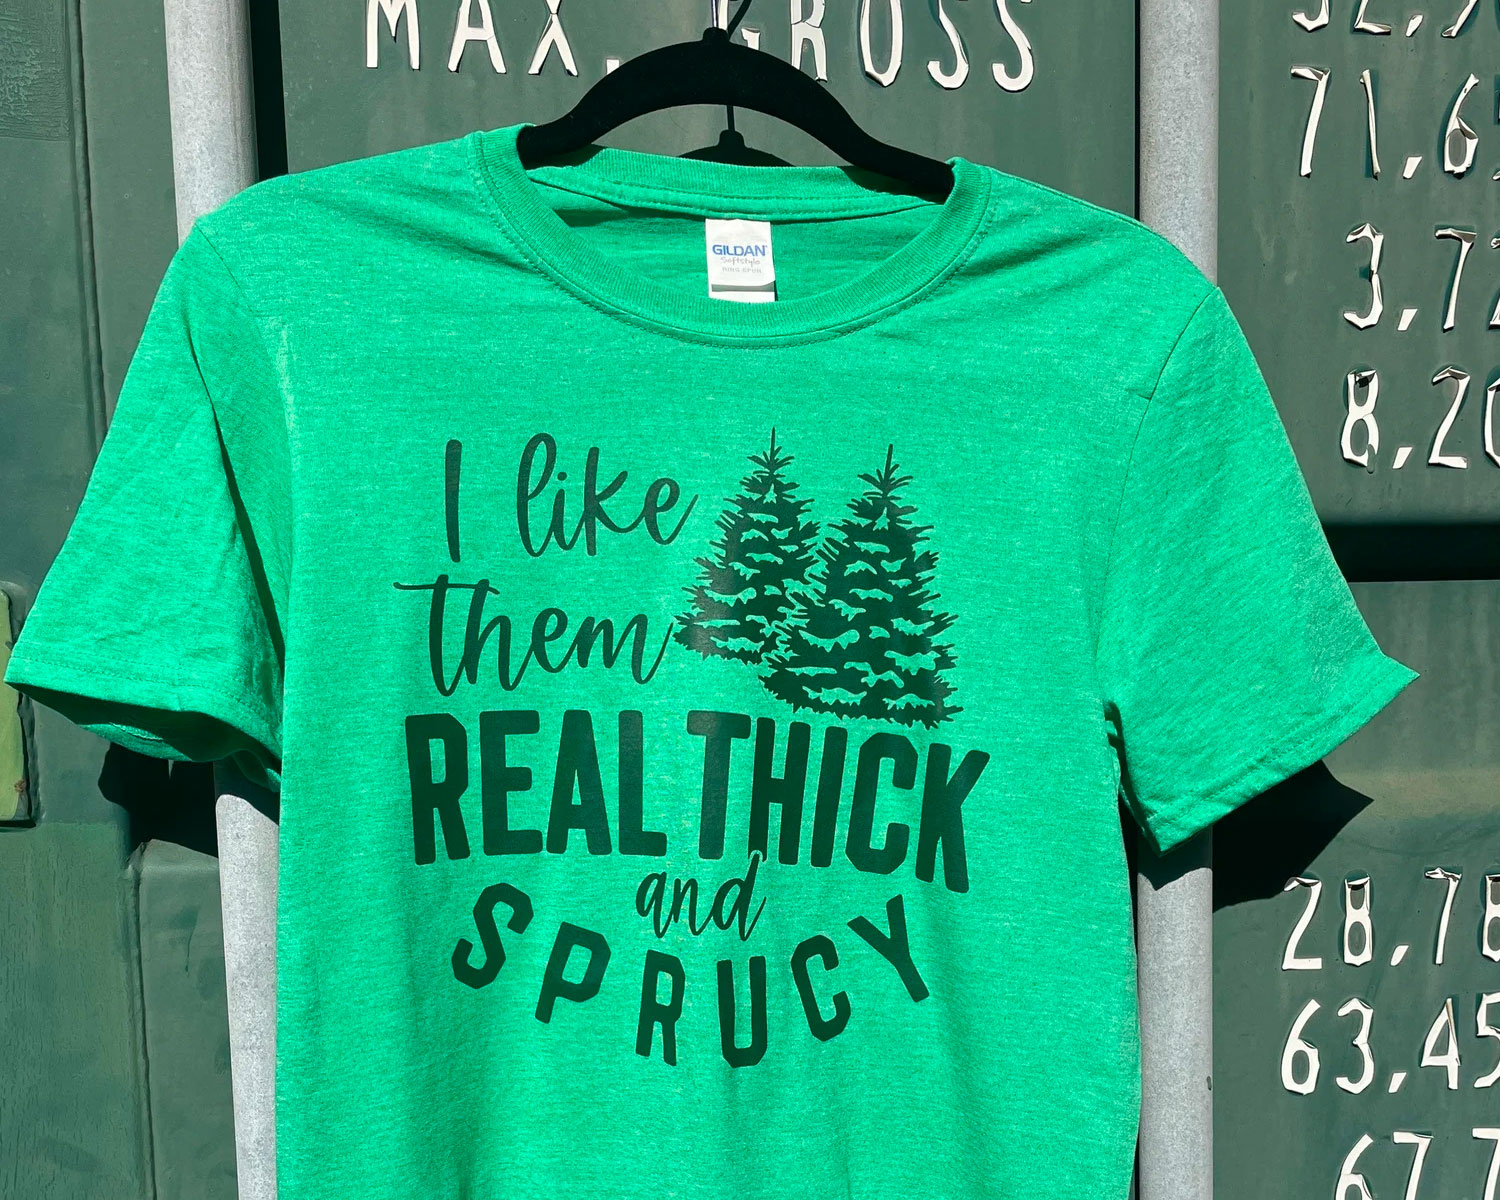 Christmas shirt "I Love Them Real Thick and Sprucy"